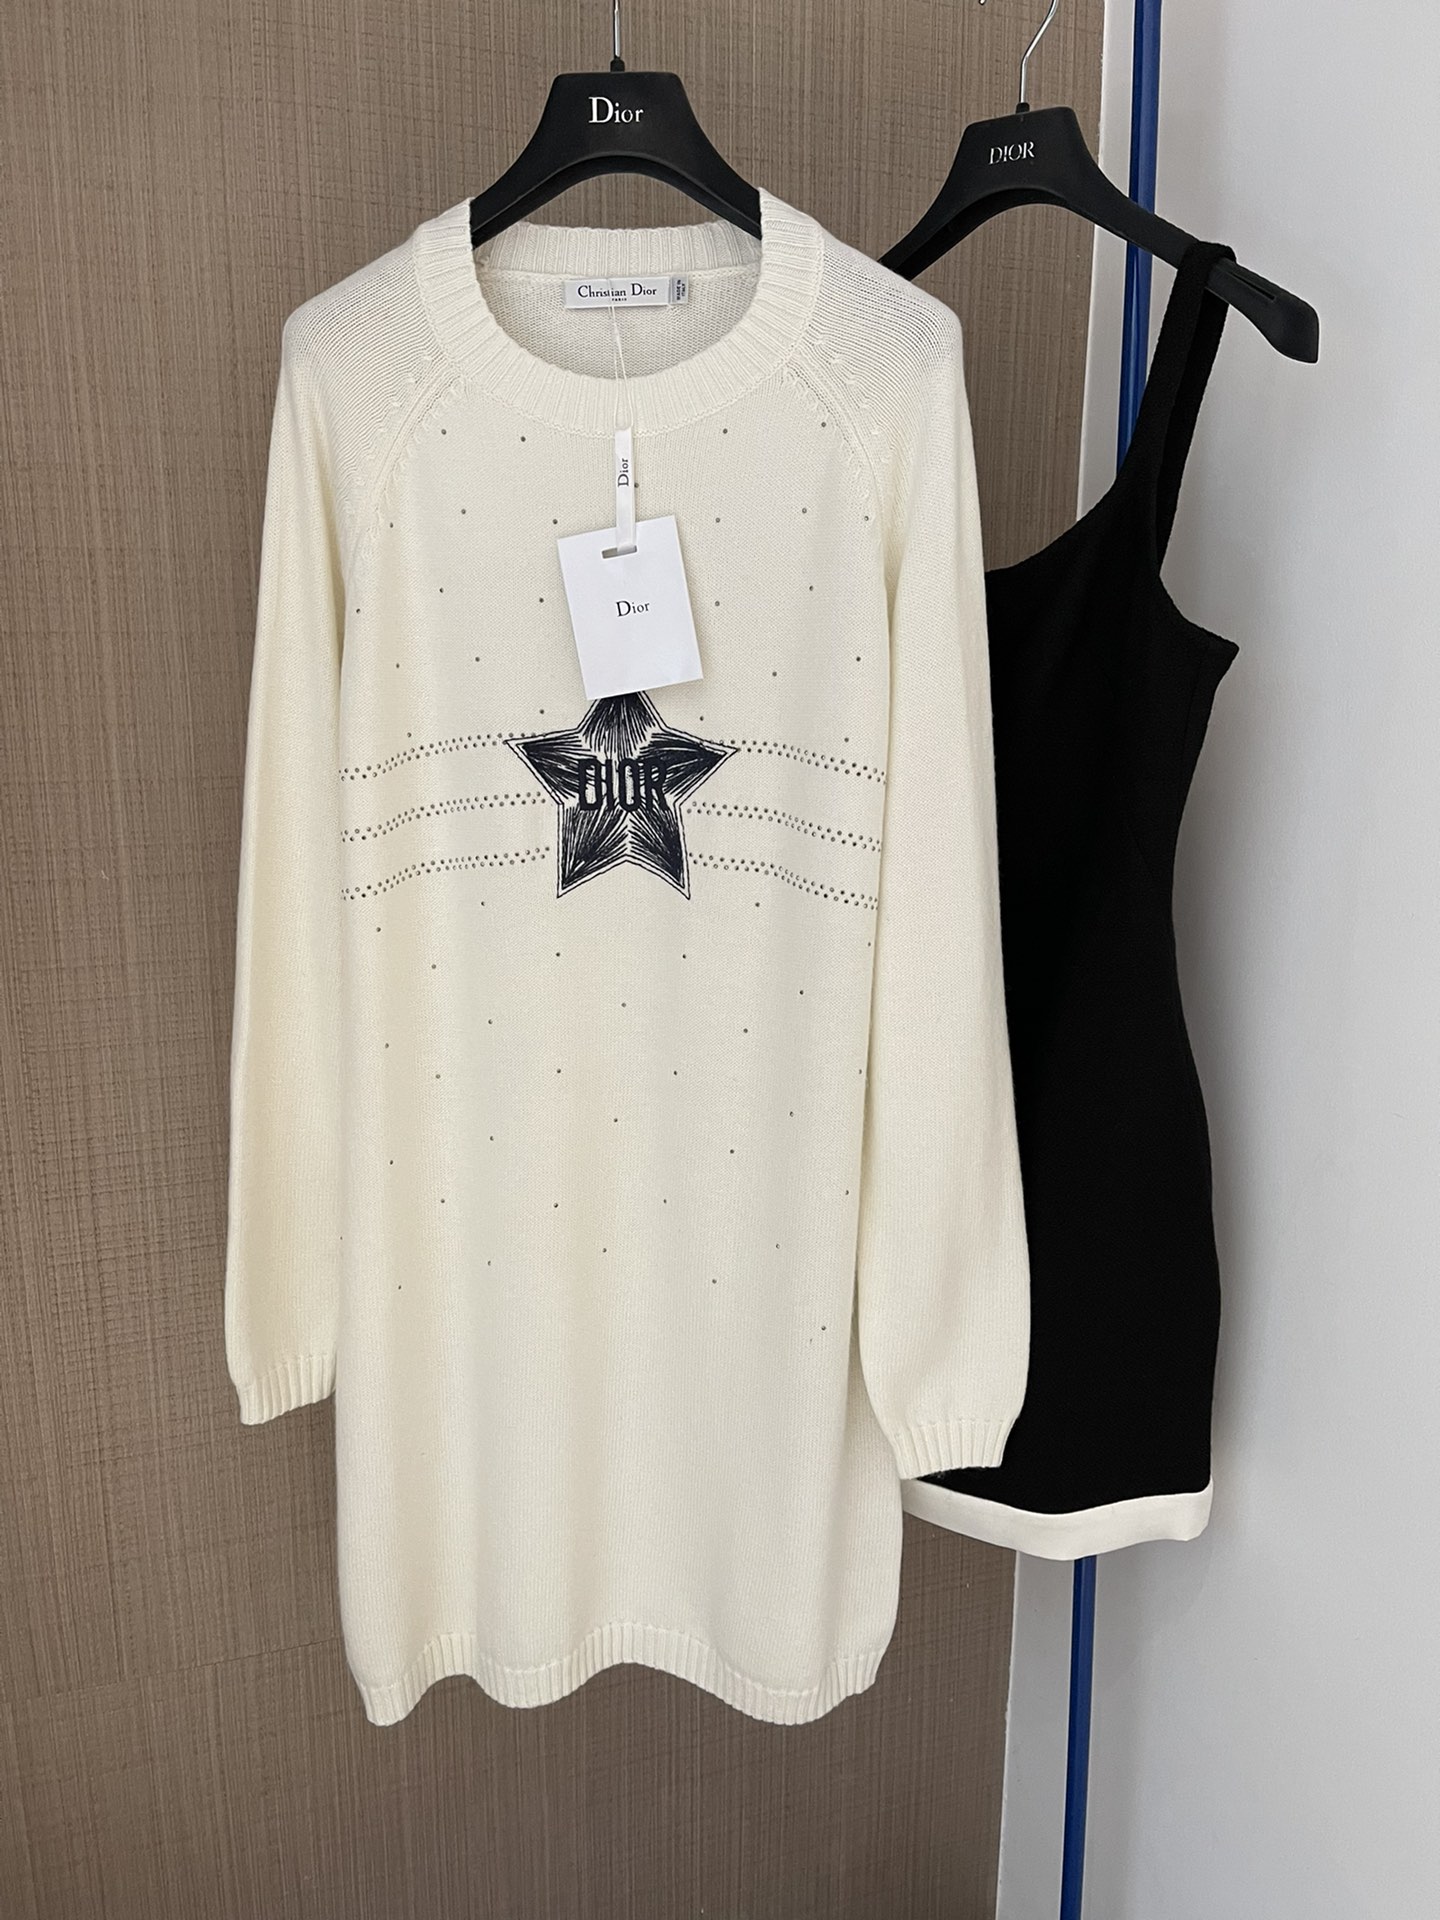 Dior Store
 Clothing Dresses Embroidery Cashmere Knitting Wool Spring Collection